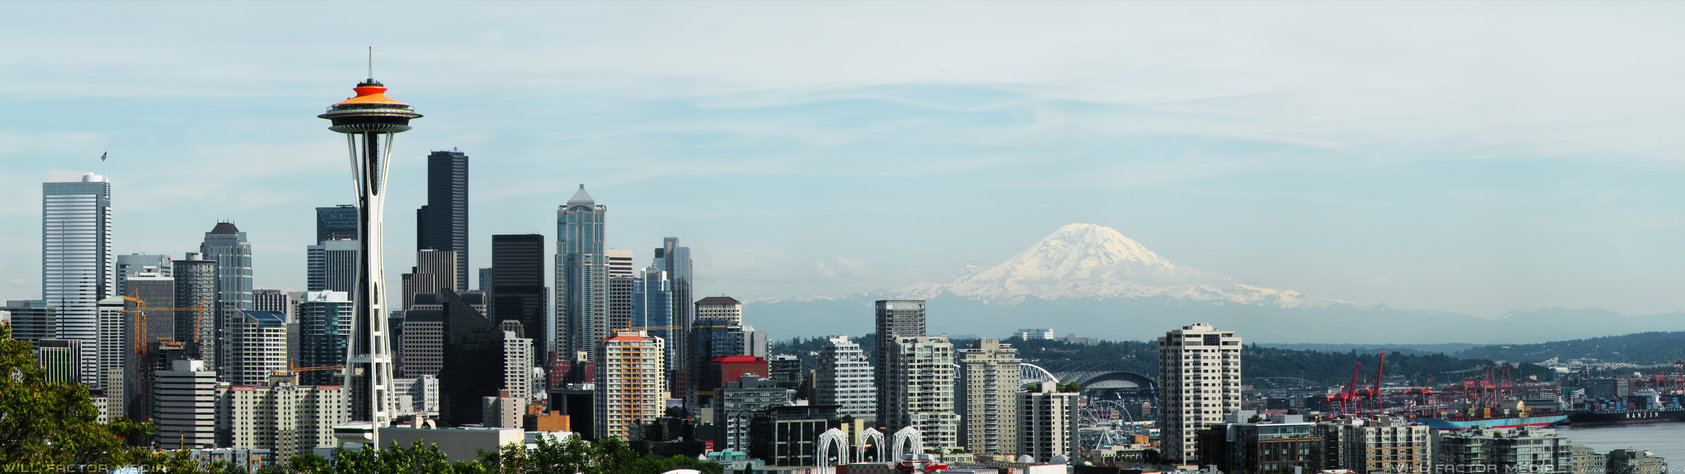 Dual Monitor 3840x1080 Seattle Wallpaper by WillFactorMedia on 1685x474